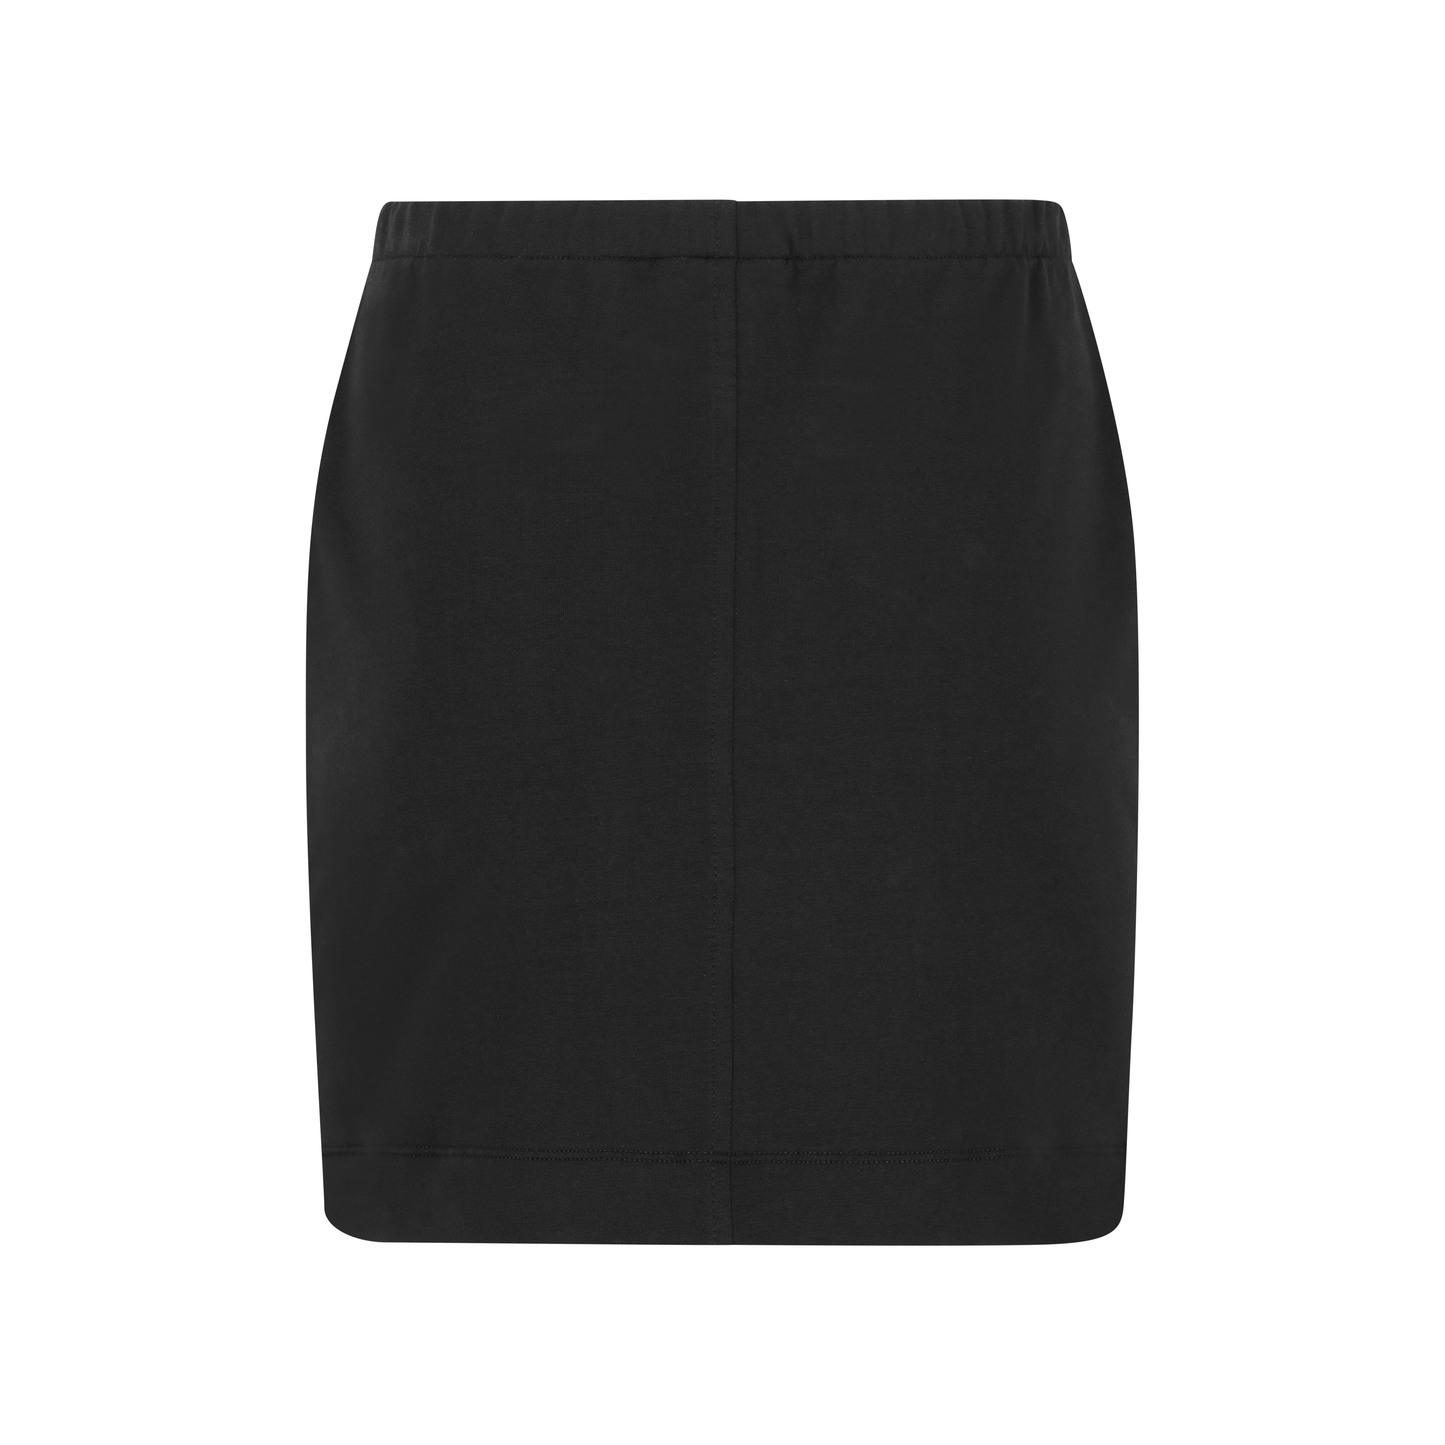 POINTY Skirt Mini - Pure Black - Made on demand